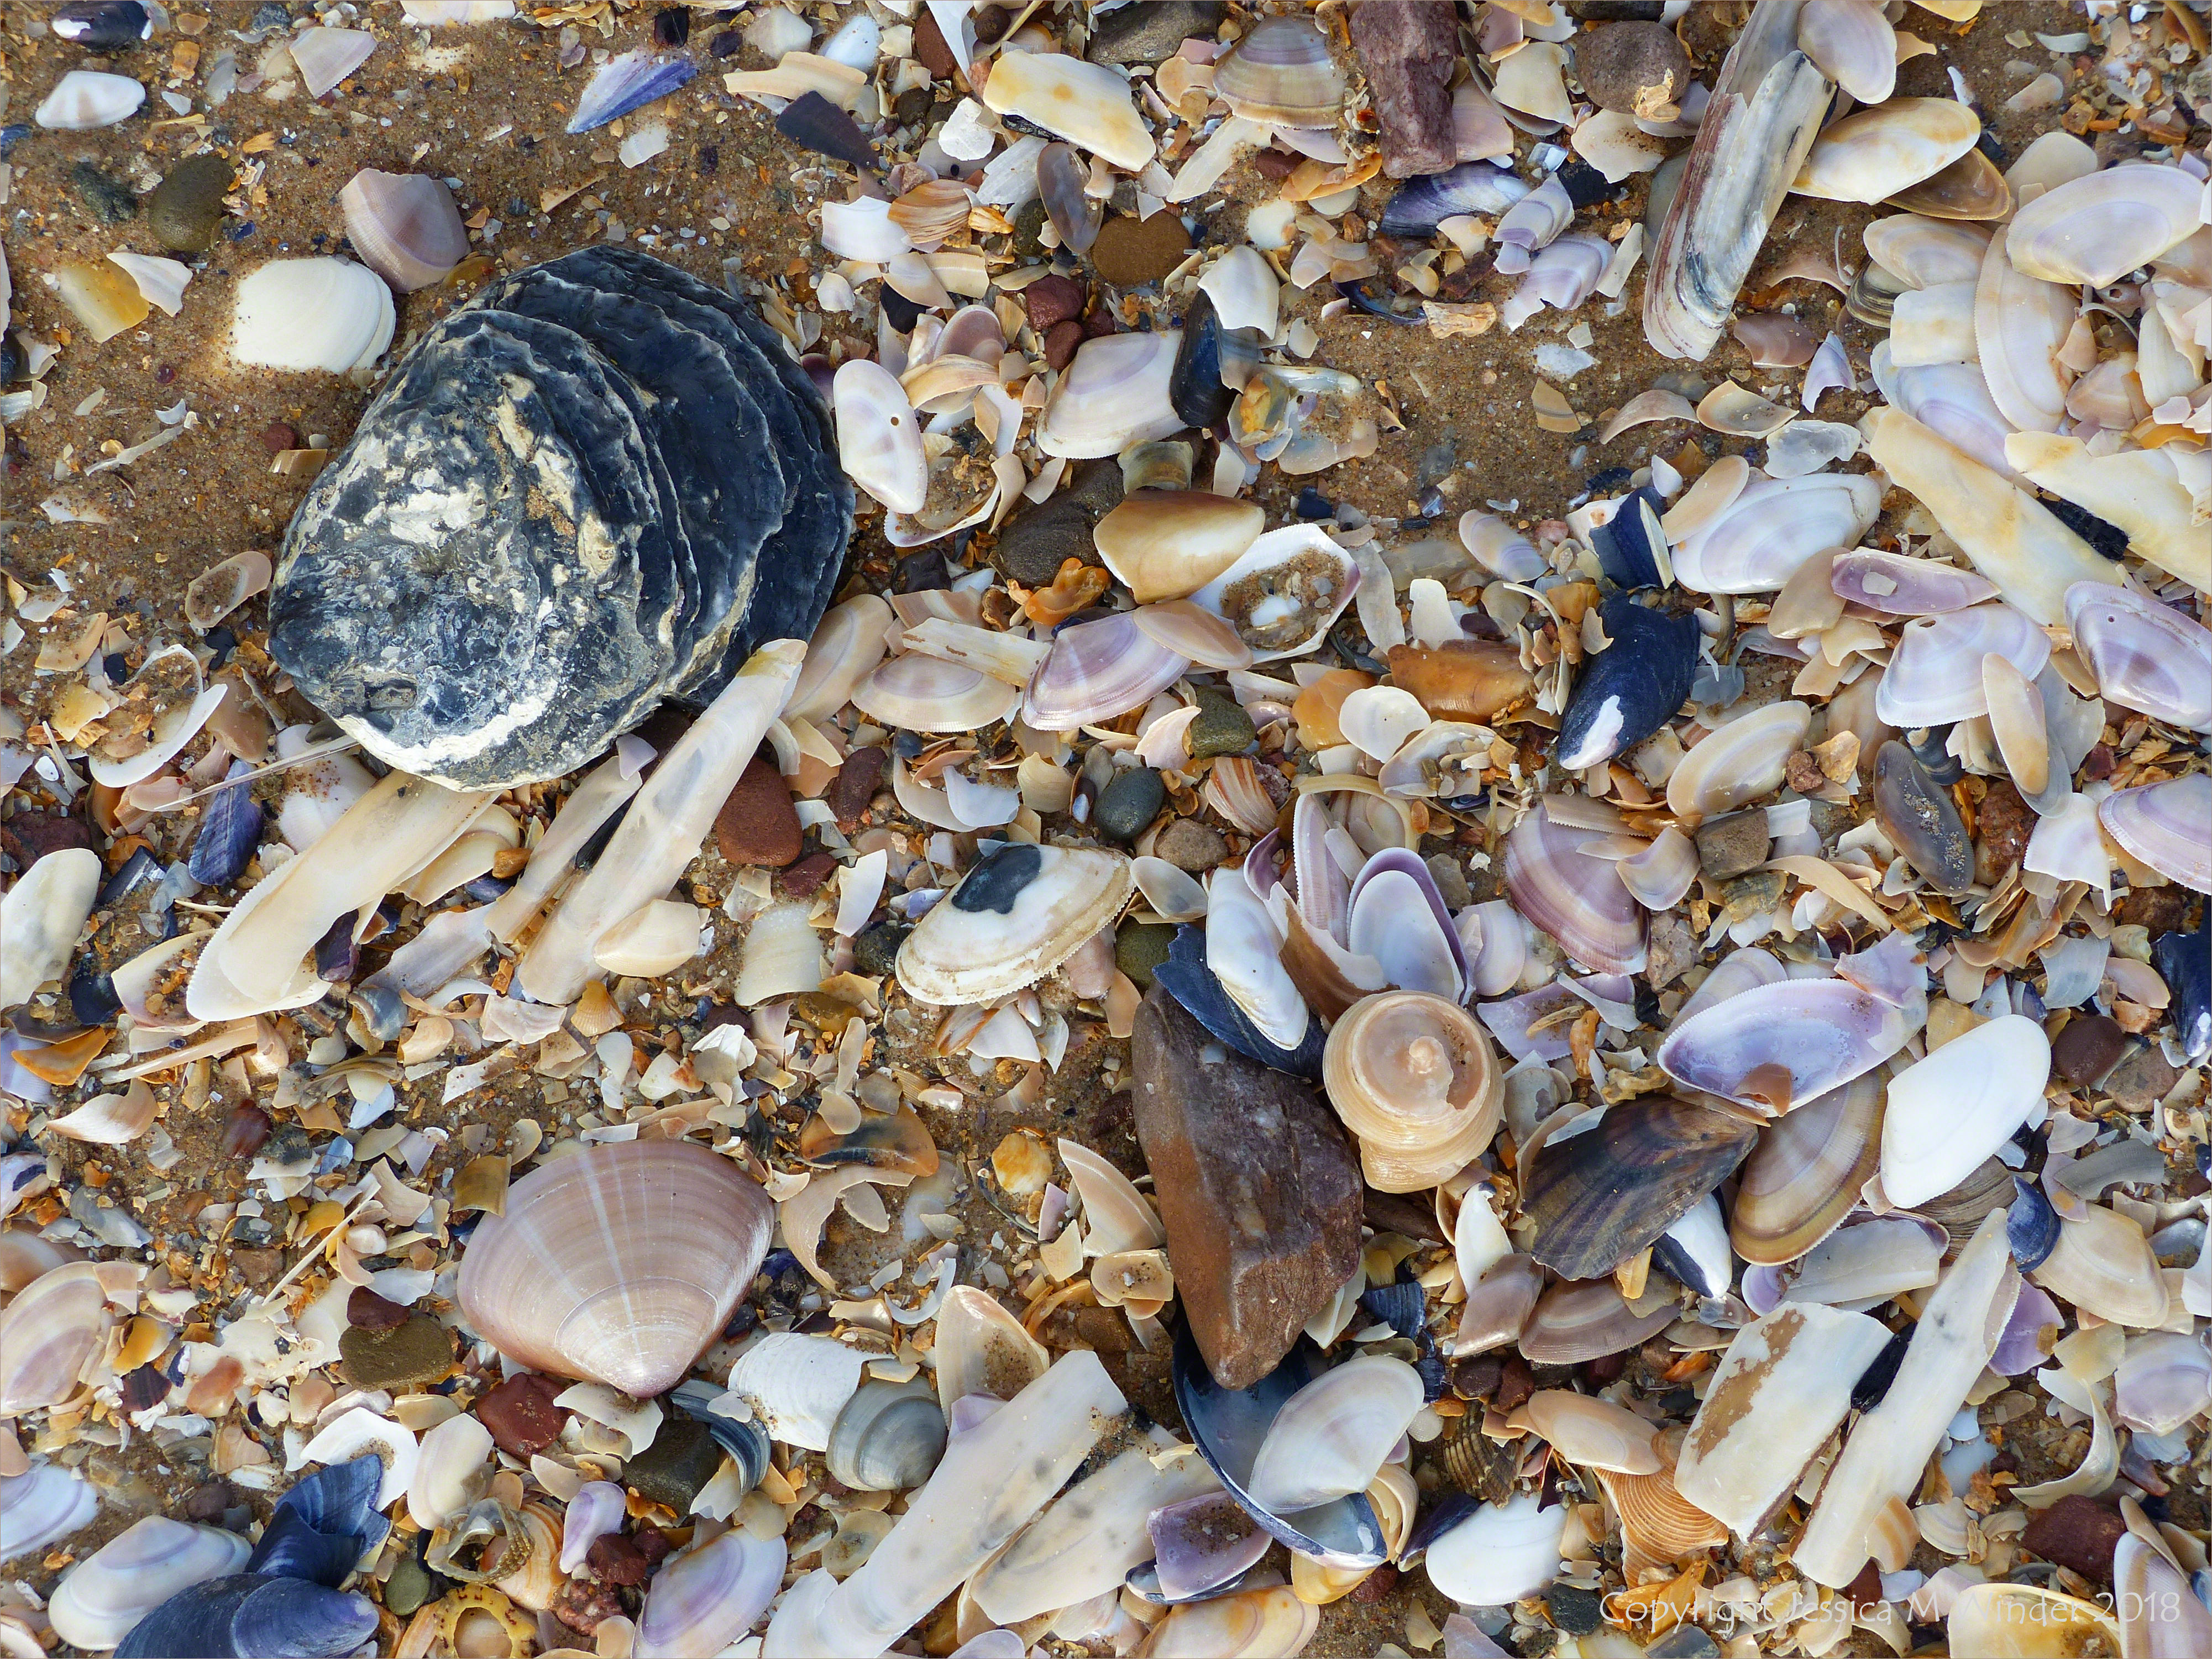 Old oyster shell on the beach with other common British seashells - oyster shell variations